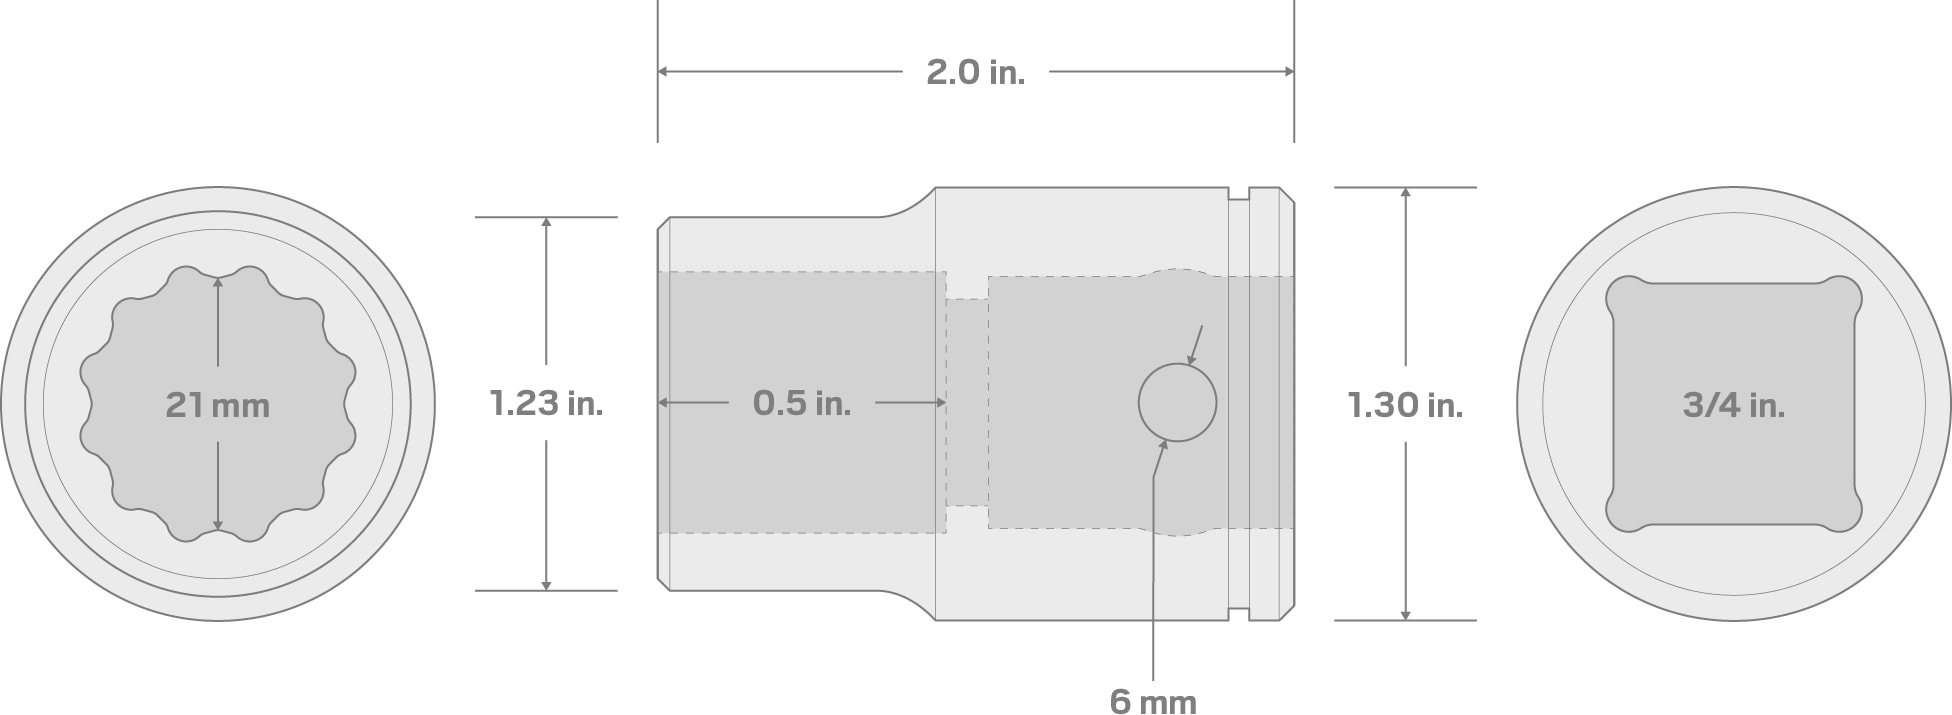 Specs for 3/4 Inch Drive x 21 mm 12-Point Socket